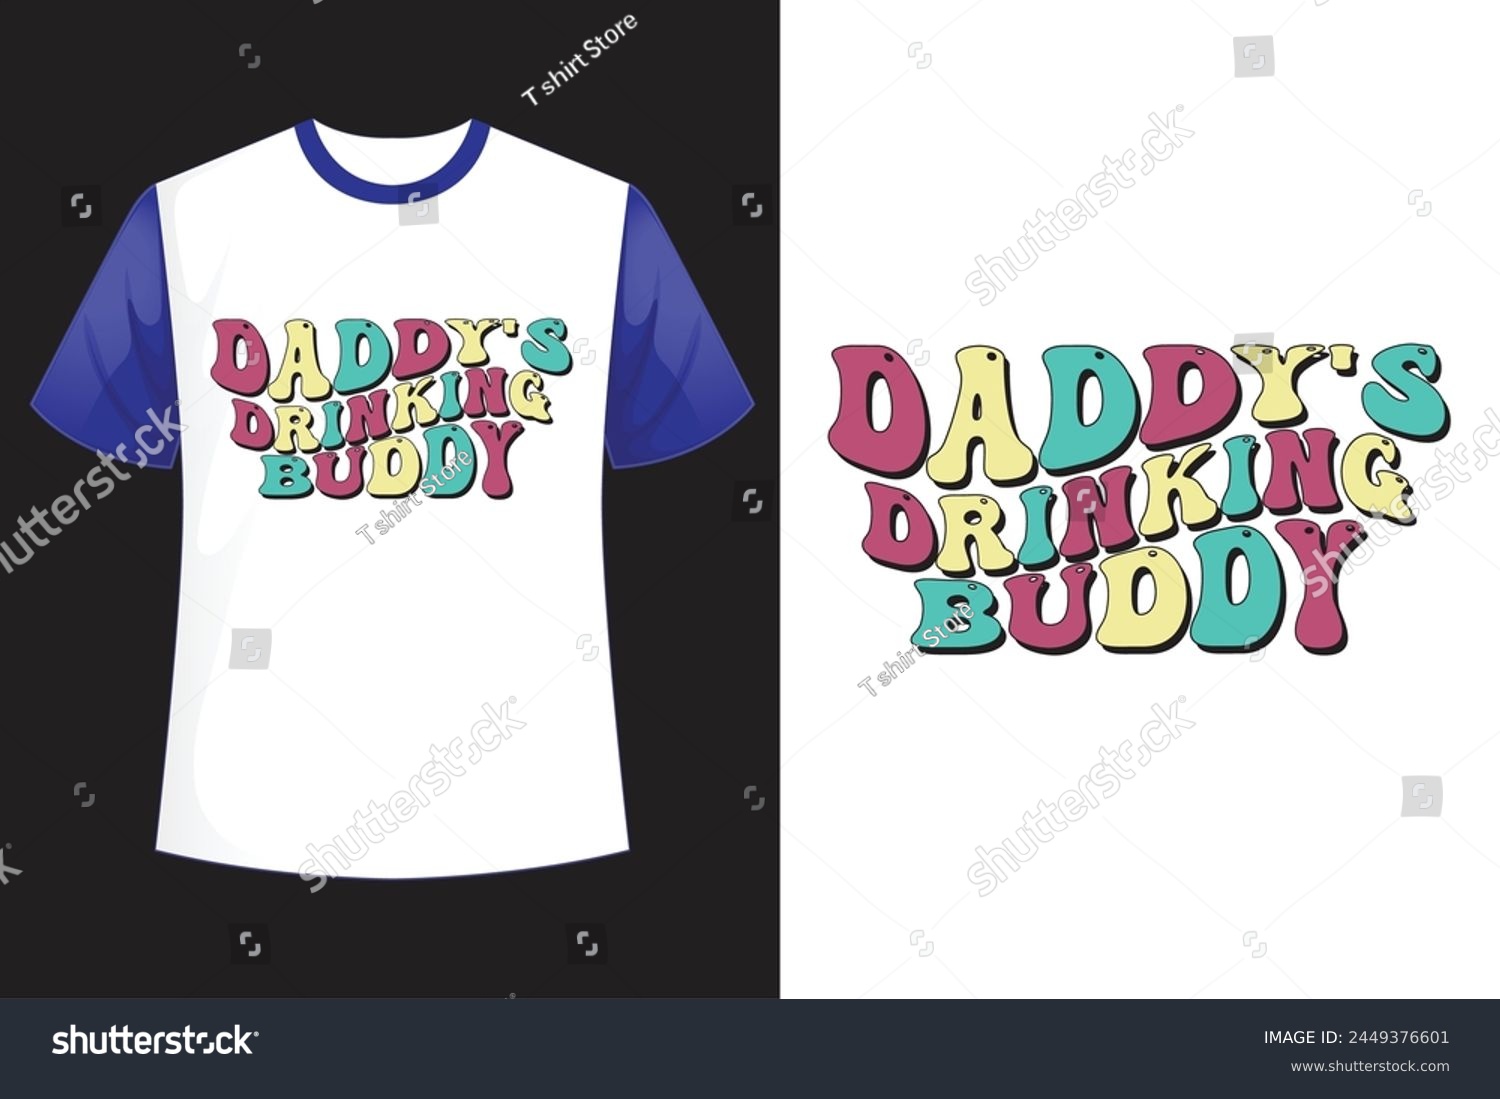 SVG of about Daddy's Drinking Buddy retro design svg